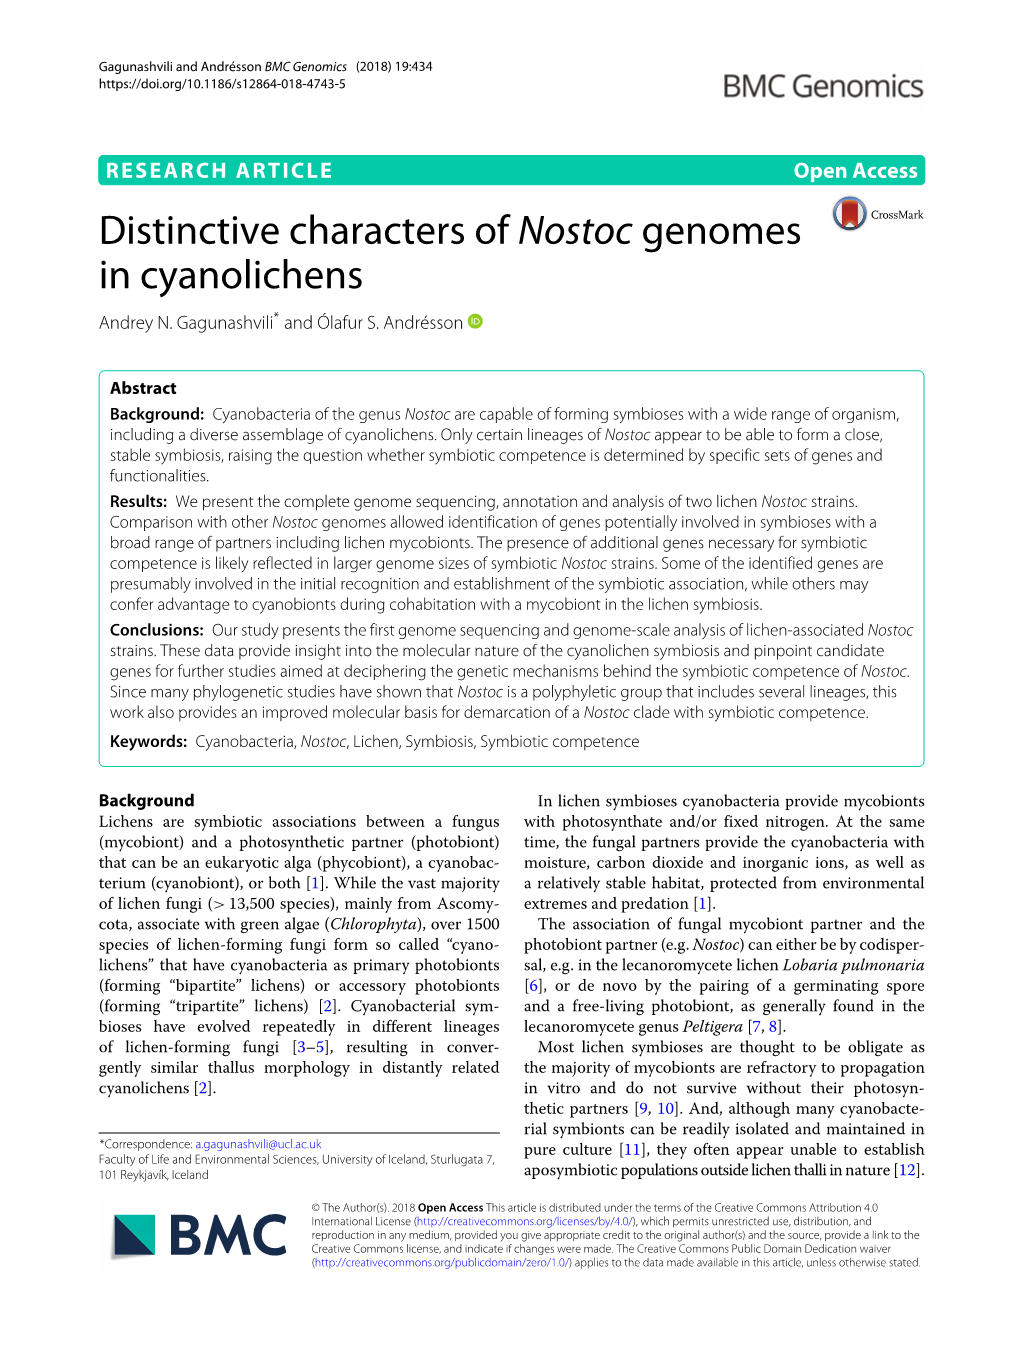 Distinctive Characters of Nostoc Genomes in Cyanolichens Andrey N